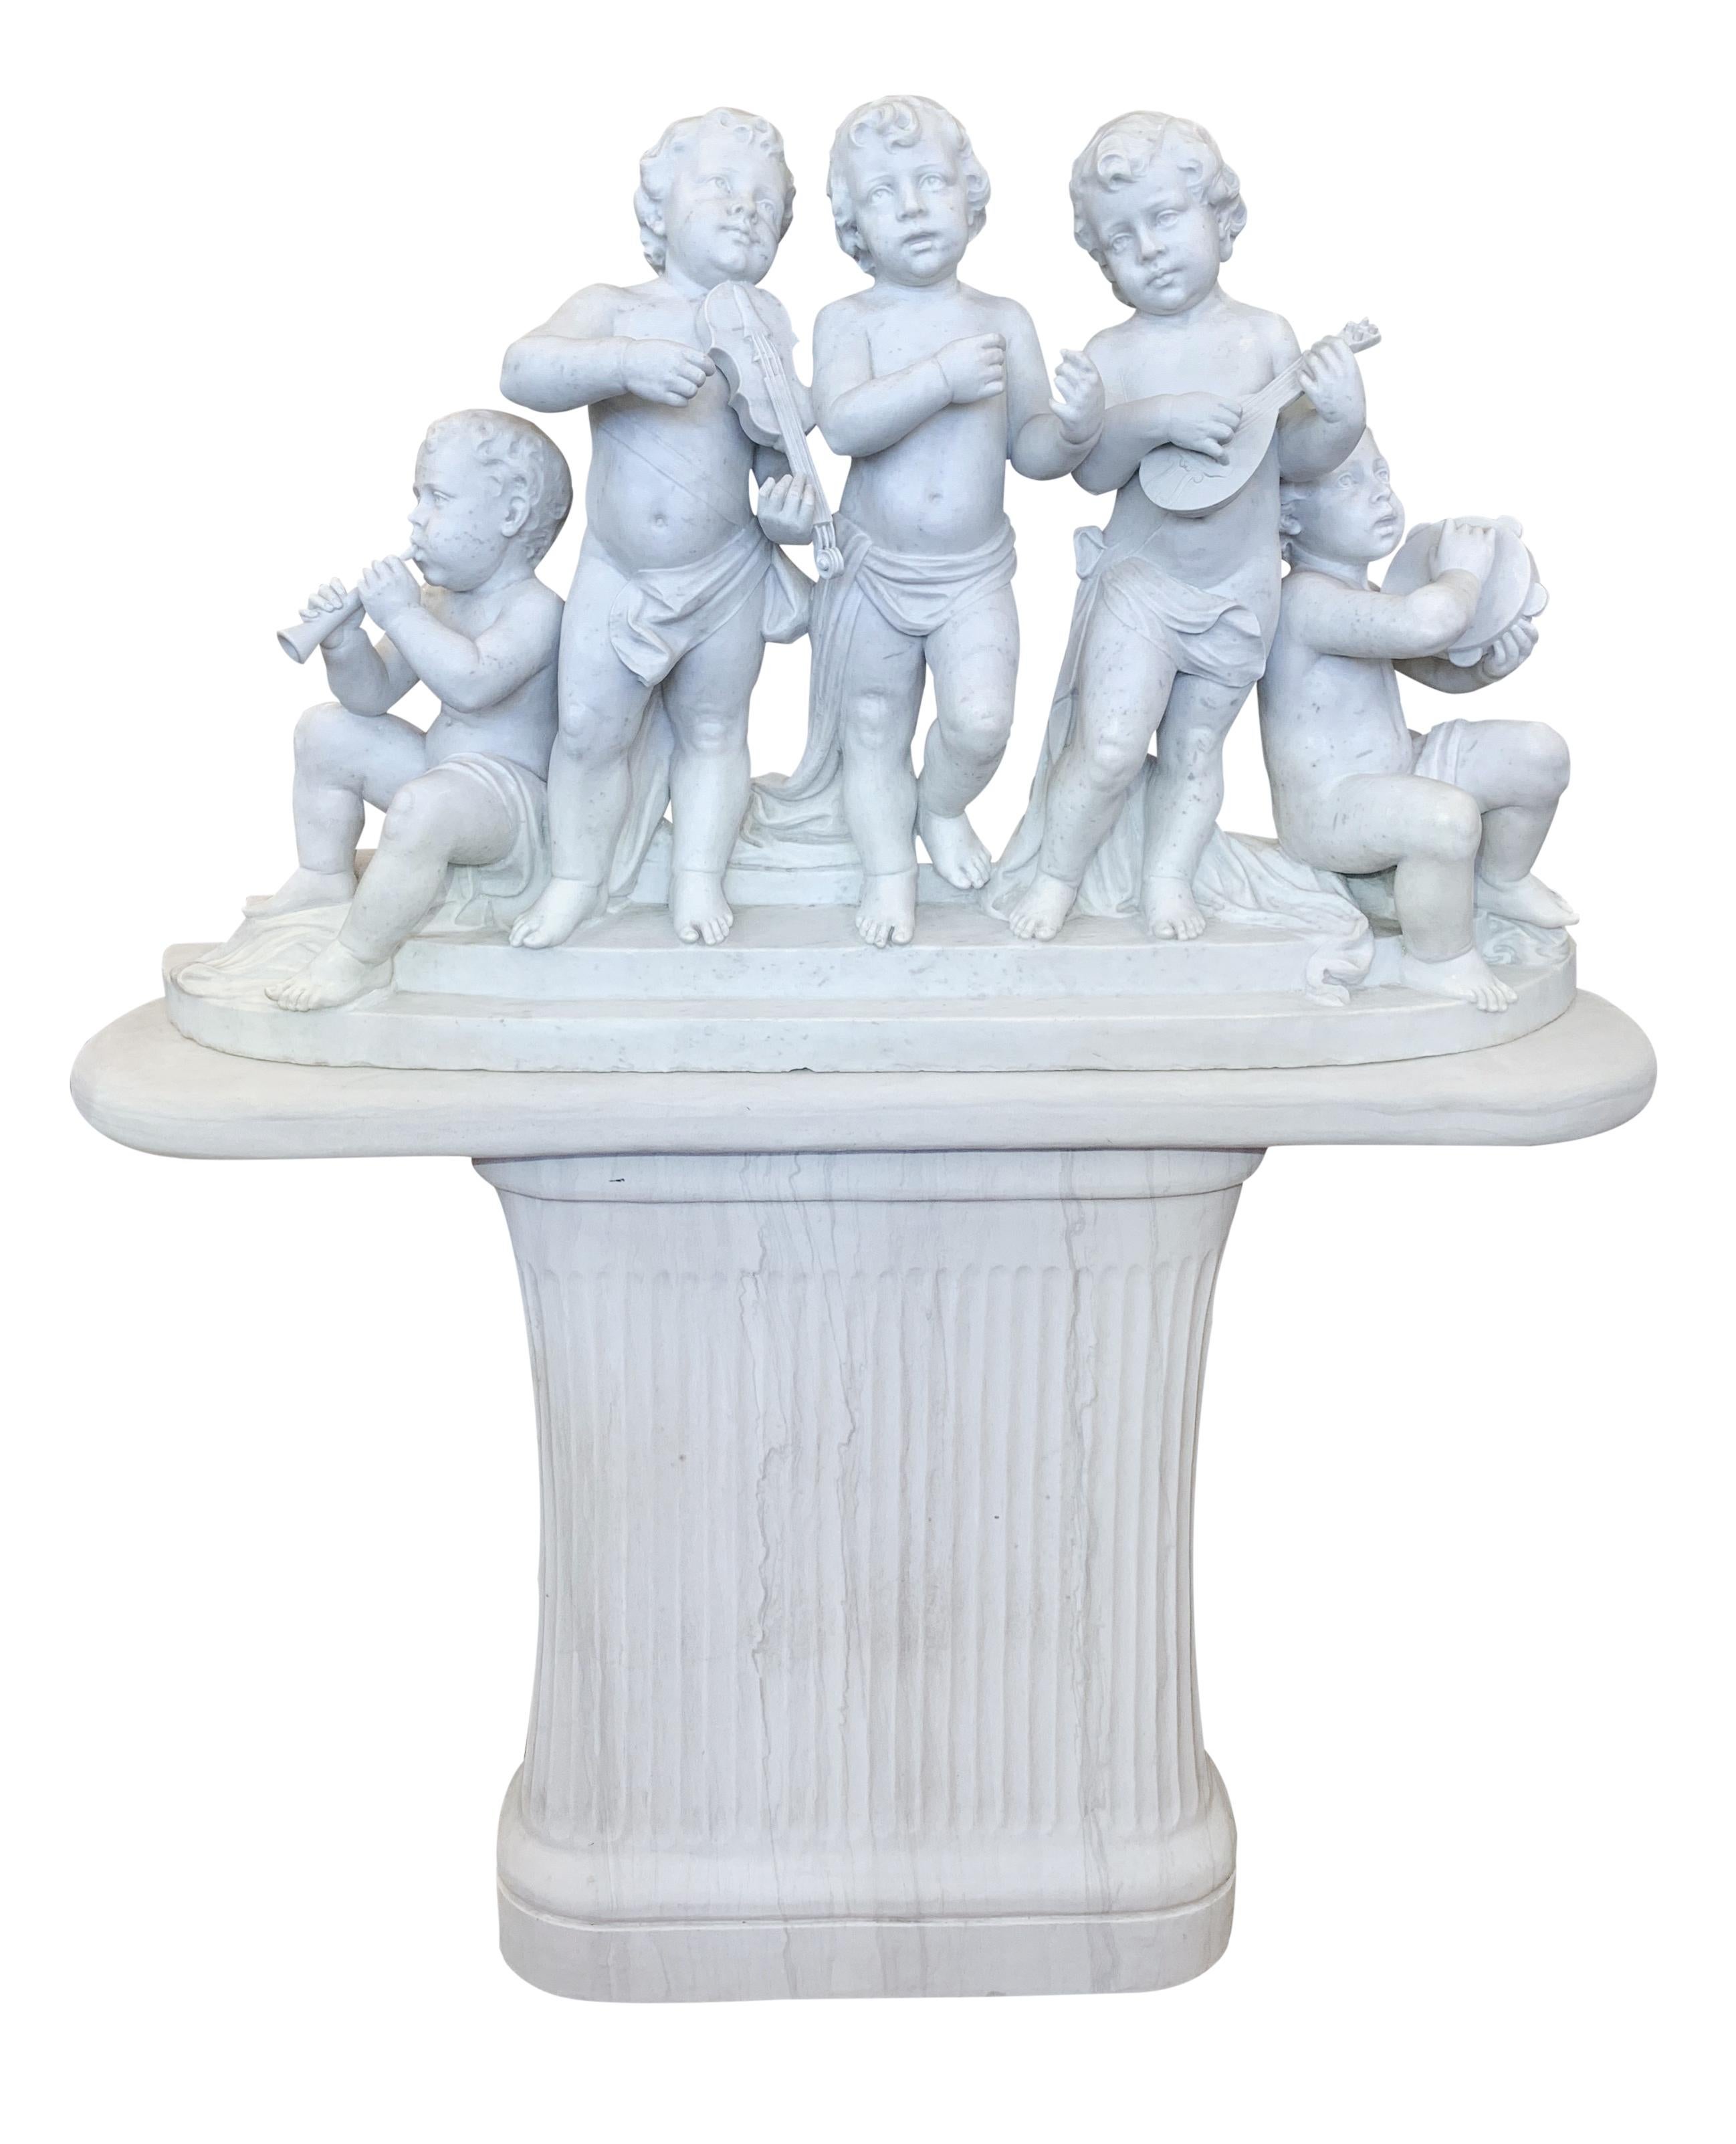 A large and finely carved 19th century Italian white marble musical group. This lovely group depicting five Bacchic putti musicians playing various musical instruments. Four of them playing trumpet, mandolin, tambourine, violin and one singer. Three